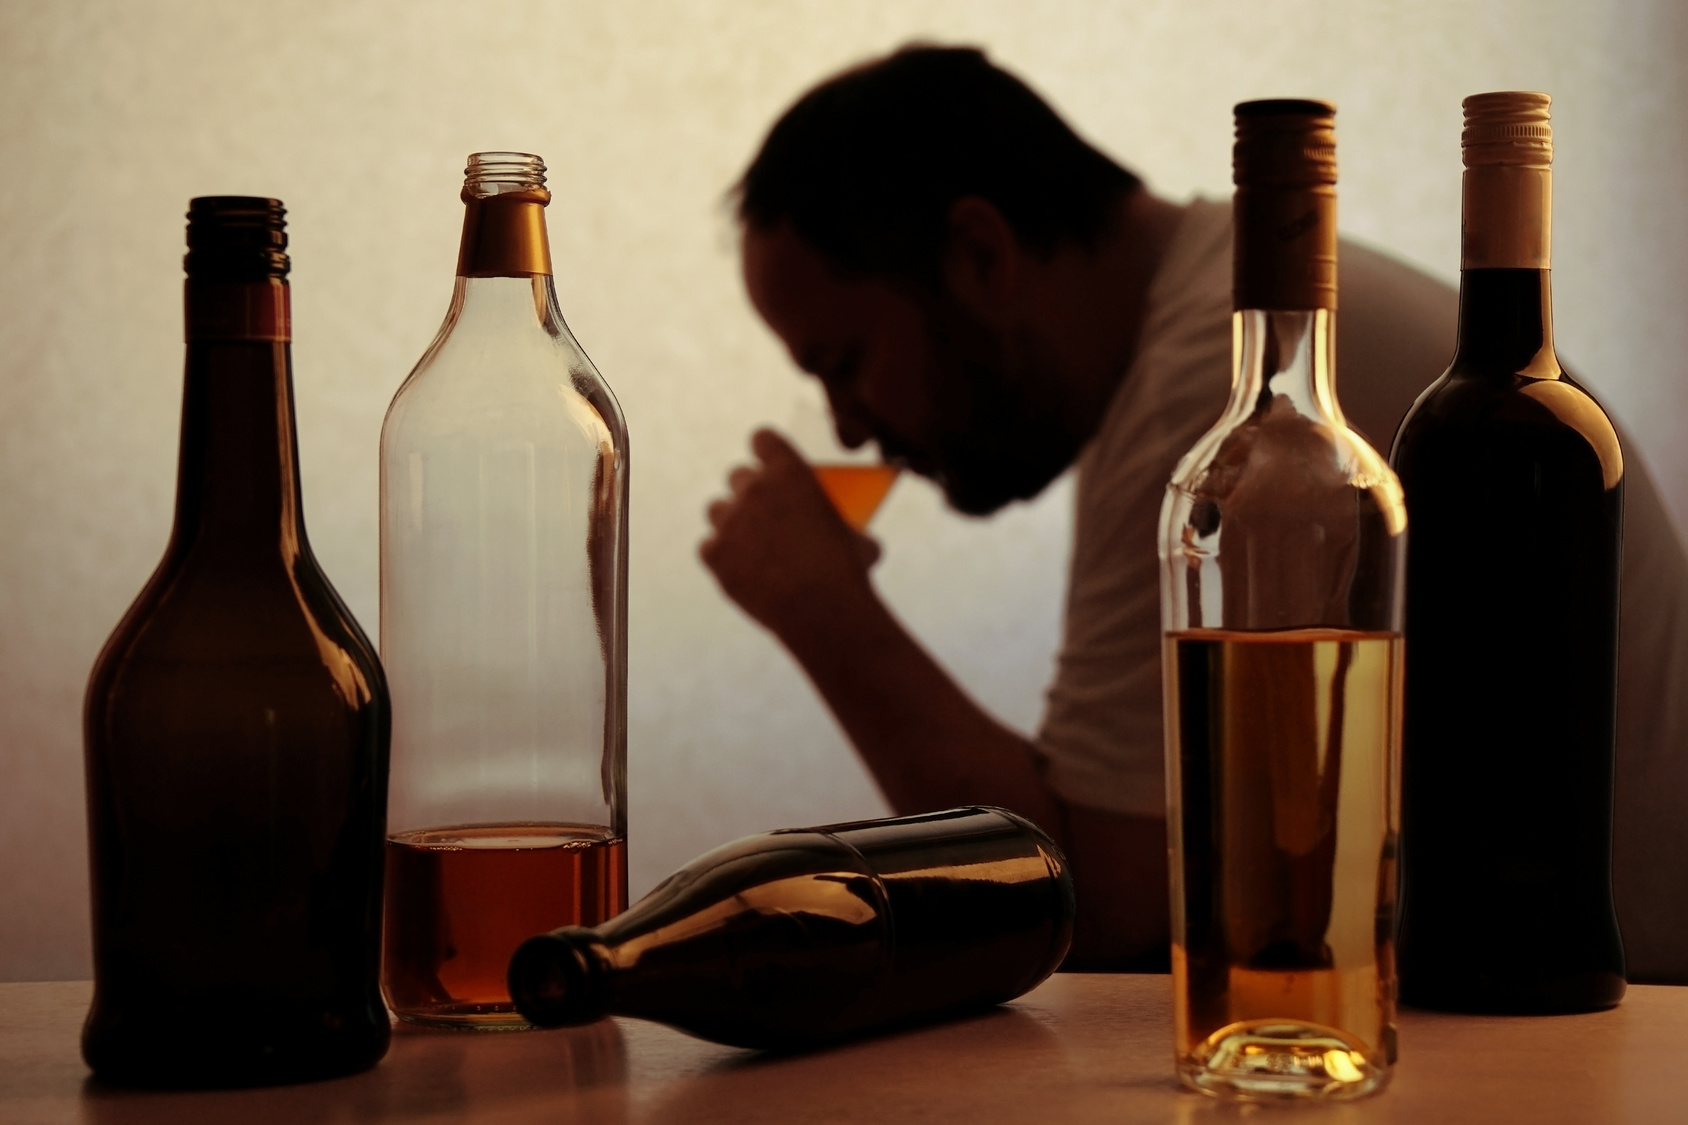 silhouette of anonymous alcoholic person drinking behind bottles of alcohol